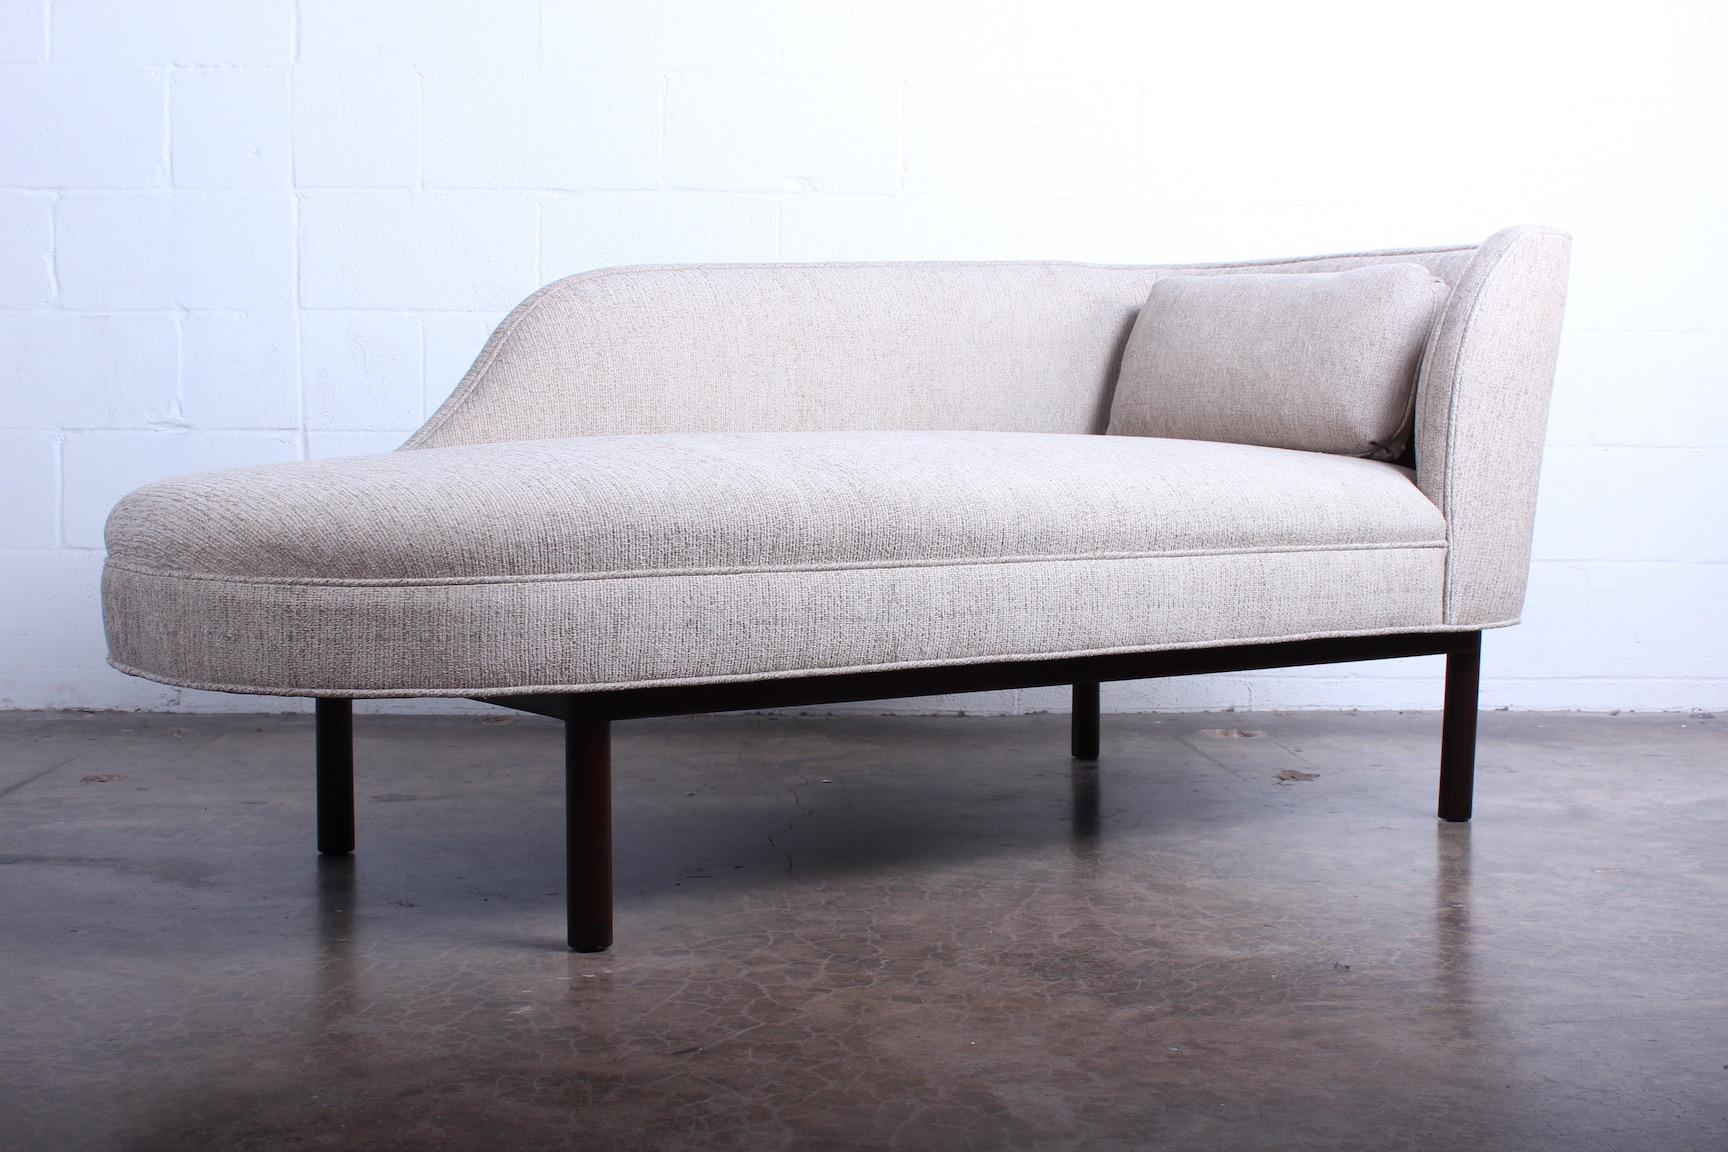 Chaise Lounge by Edward Wormley for Dunbar 2